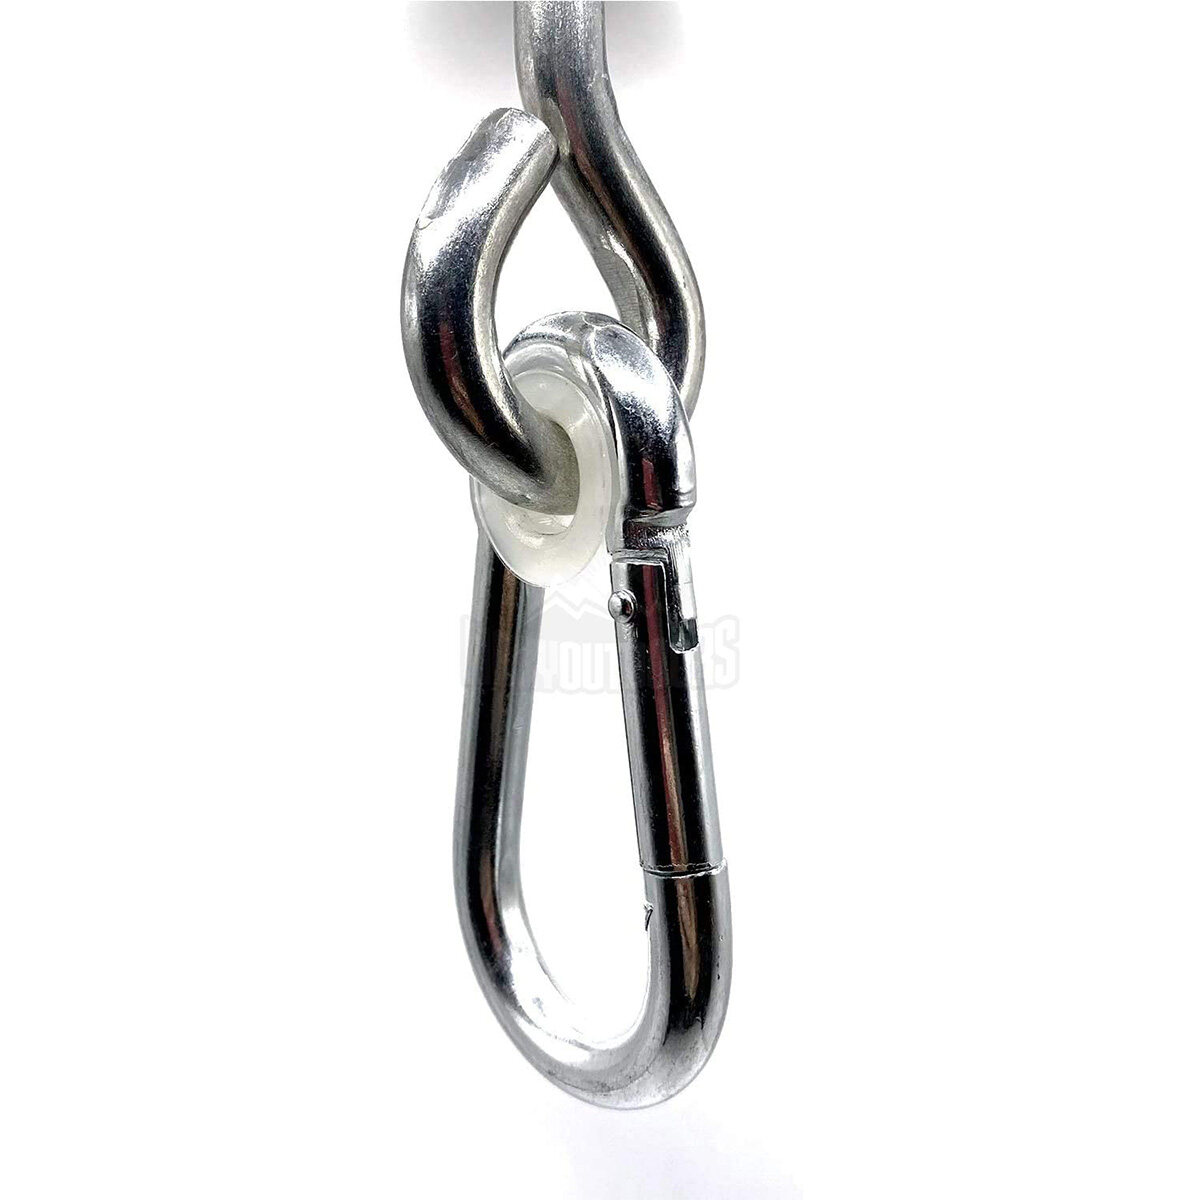 How to Use Carabiner Correctly?